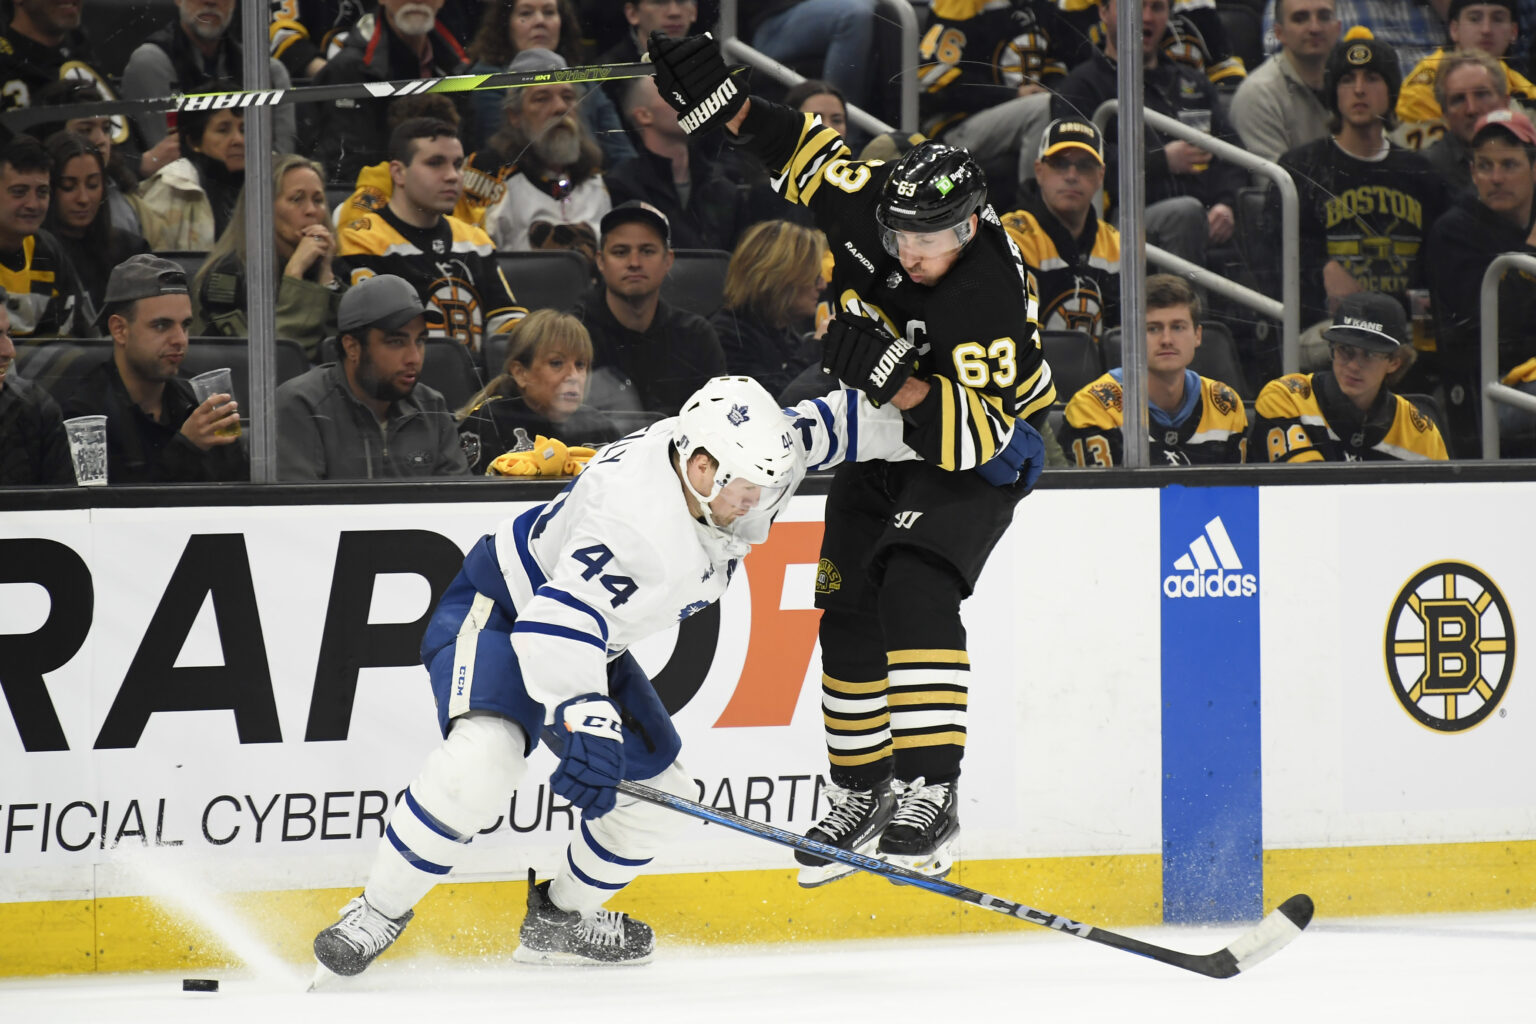 Reasons Why the Leafs Trail to the Bruins Going into Game 4.